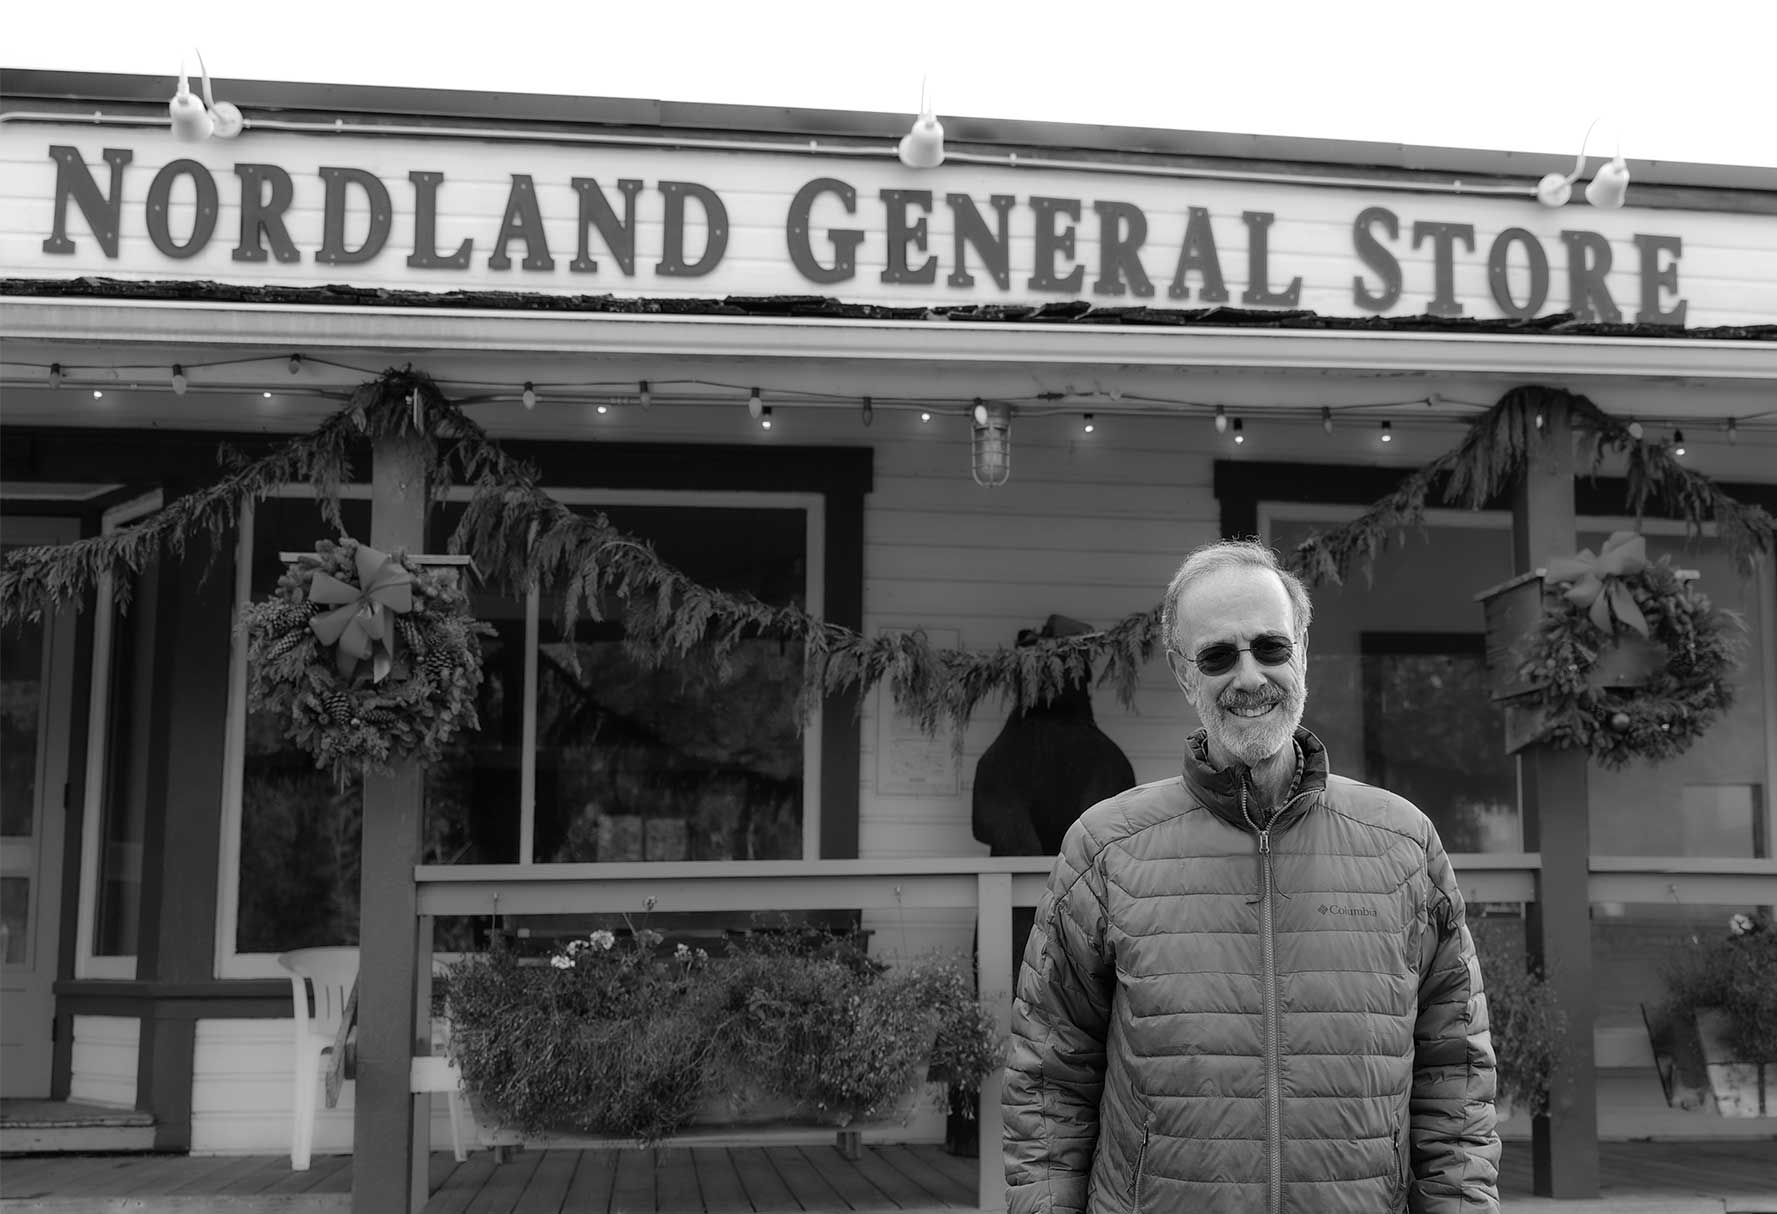 Ken Collins in front of the Nordland General Store on Marrowstone Island in District 2.